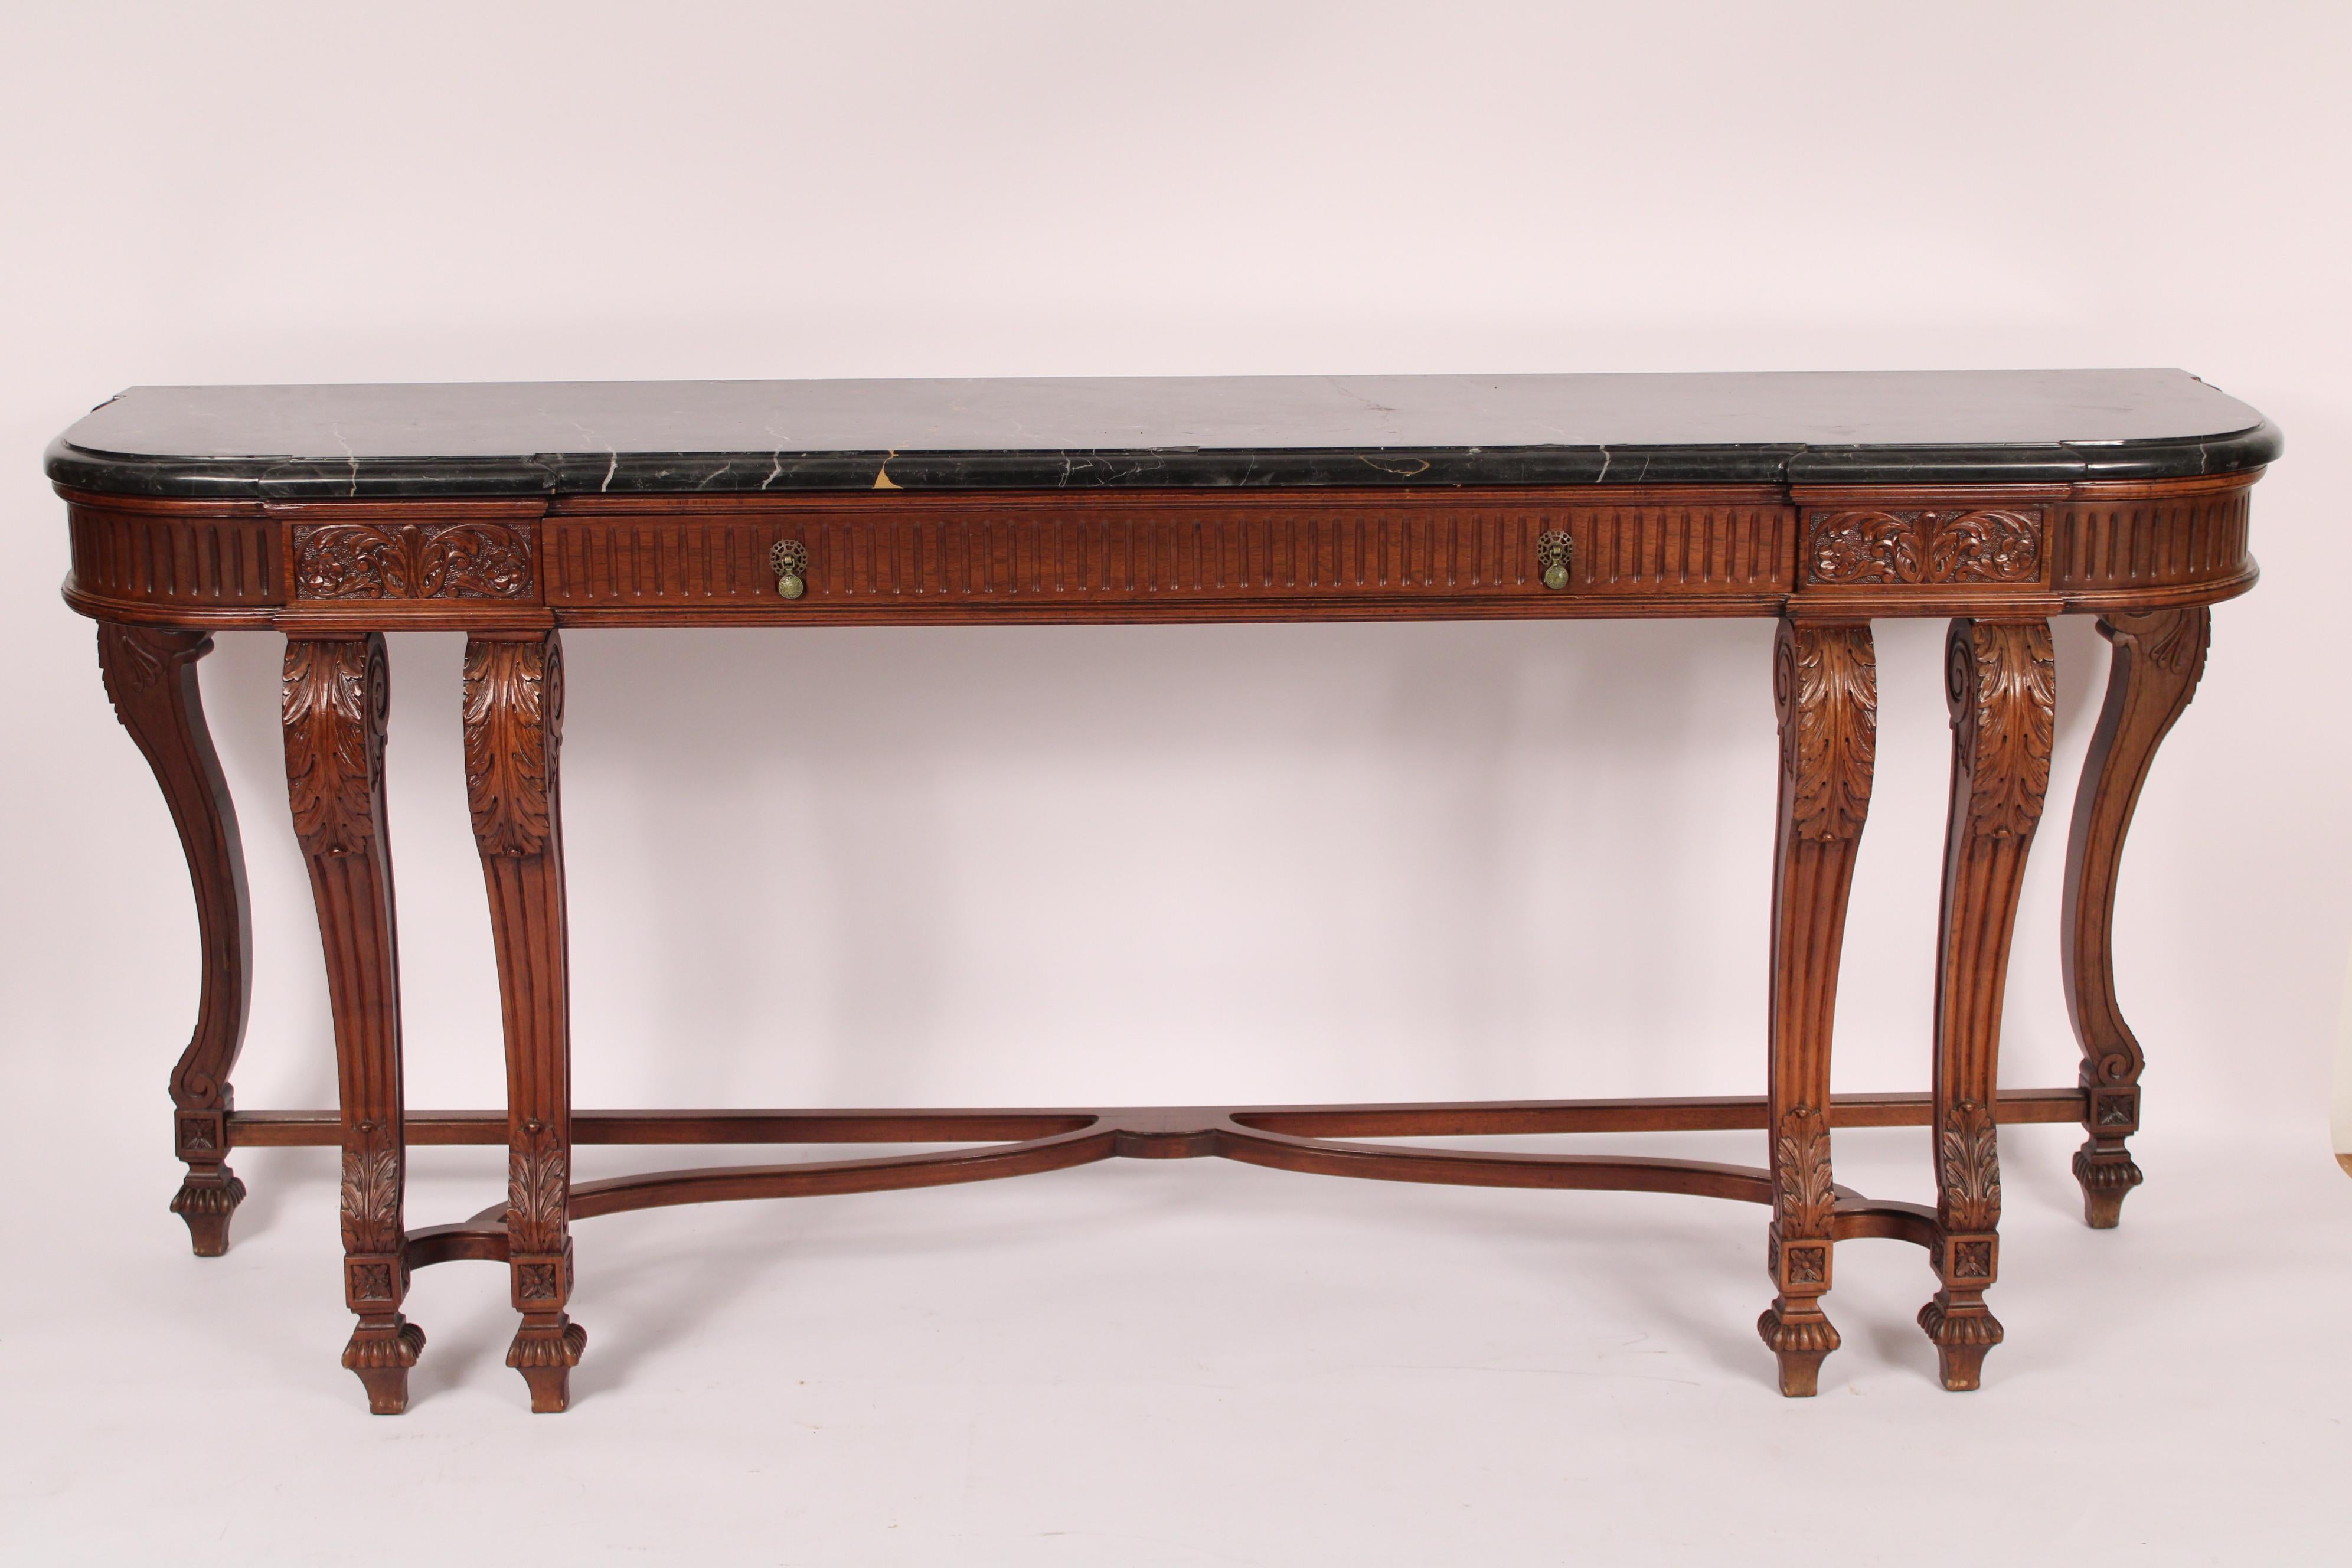 Louis XIV style walnut console table, circa 1930s. With a Belgium marble top, one wide frieze drawer and acanthus leaf Louis XIV style carved walnut legs. Hairline crack on marble top.